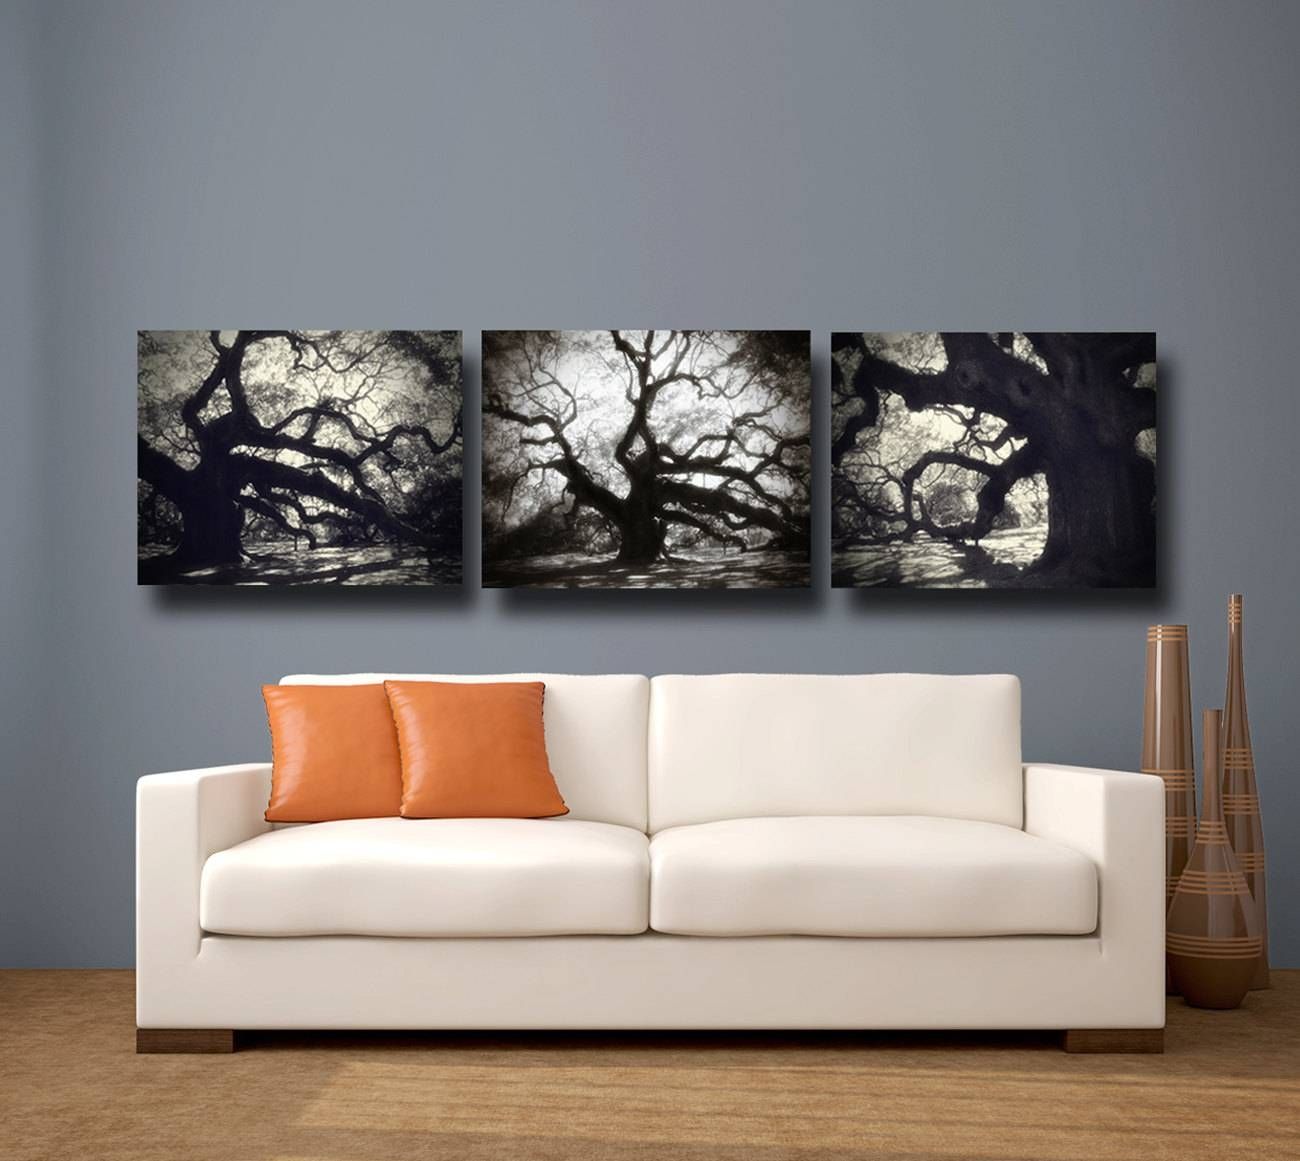 Wall Art Designs: Wall Canvas Art On Demand Free Printable Cheap Pertaining To Most Popular Canvas Wall Art 3 Piece Sets (Gallery 20 of 20)